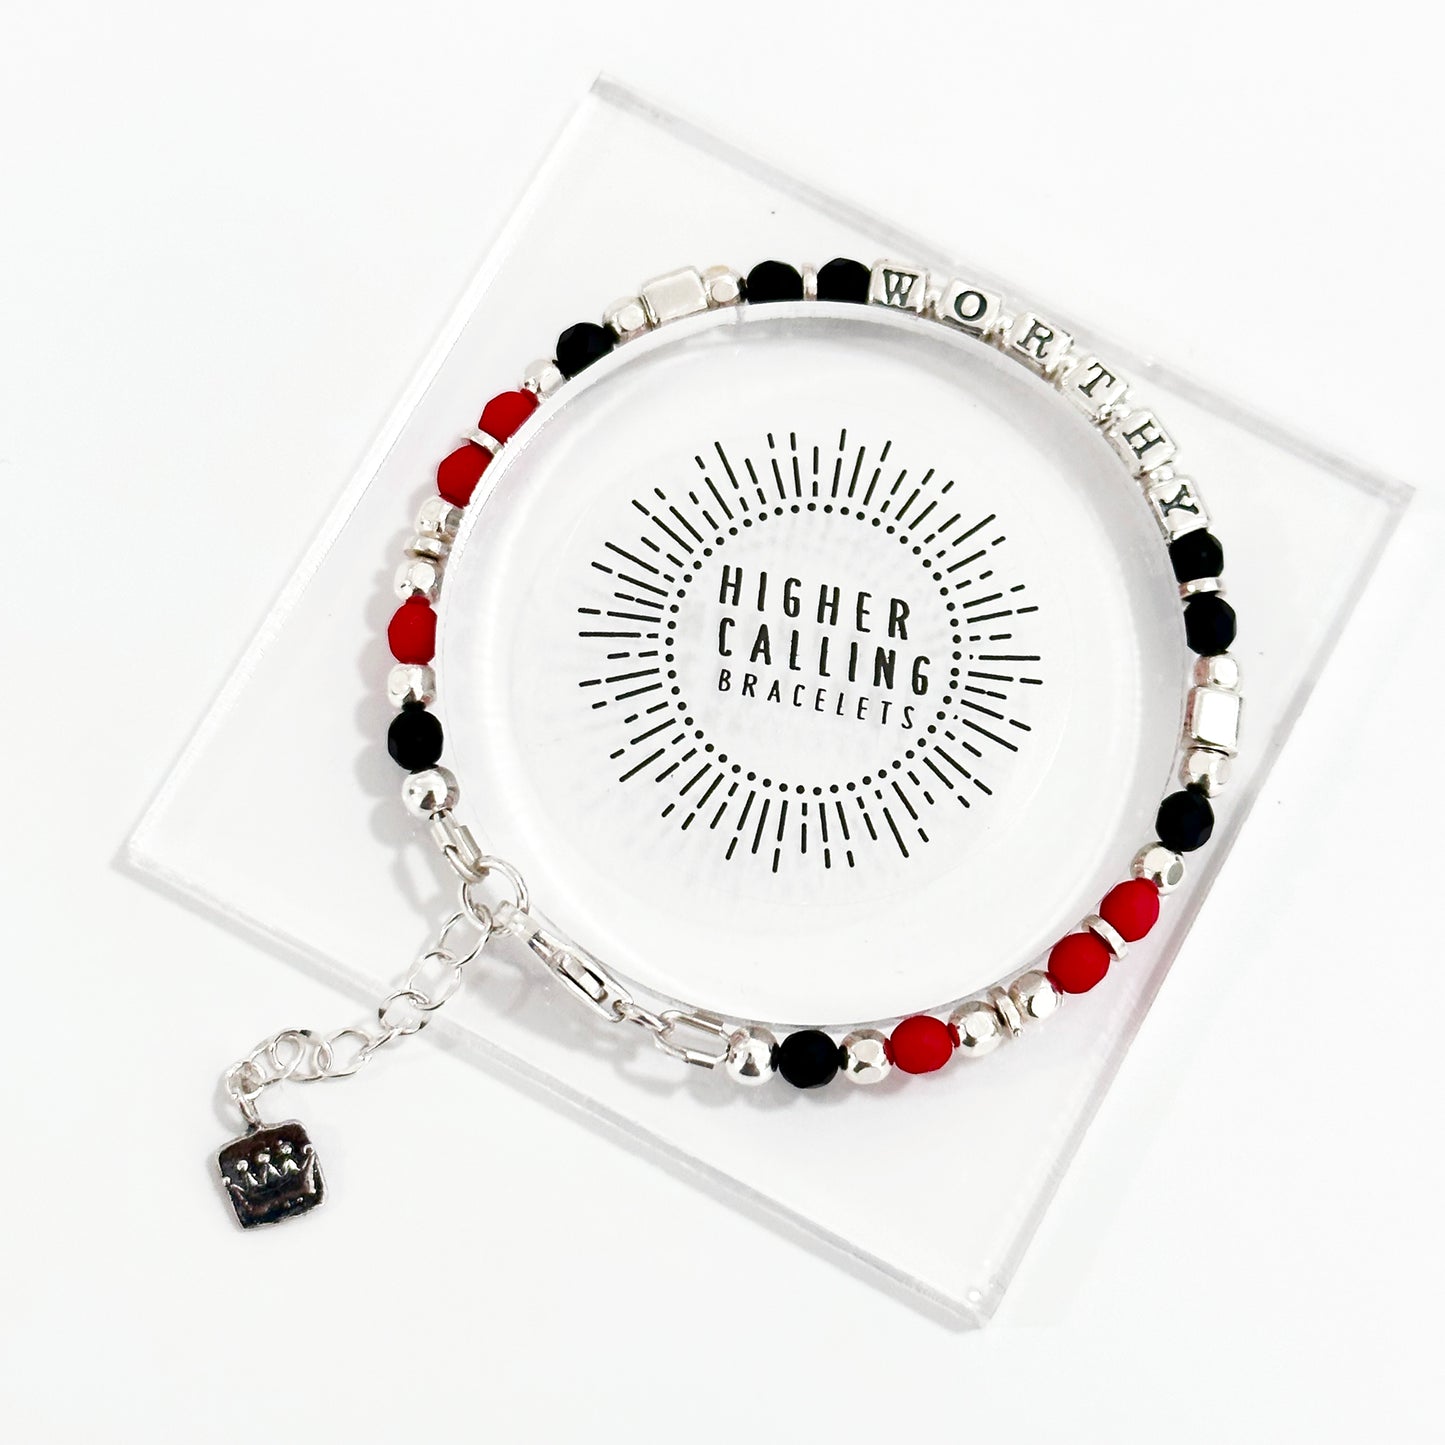 sterling silver Worthy bracelet with black onyx and red stones, and featuring a small crown charm